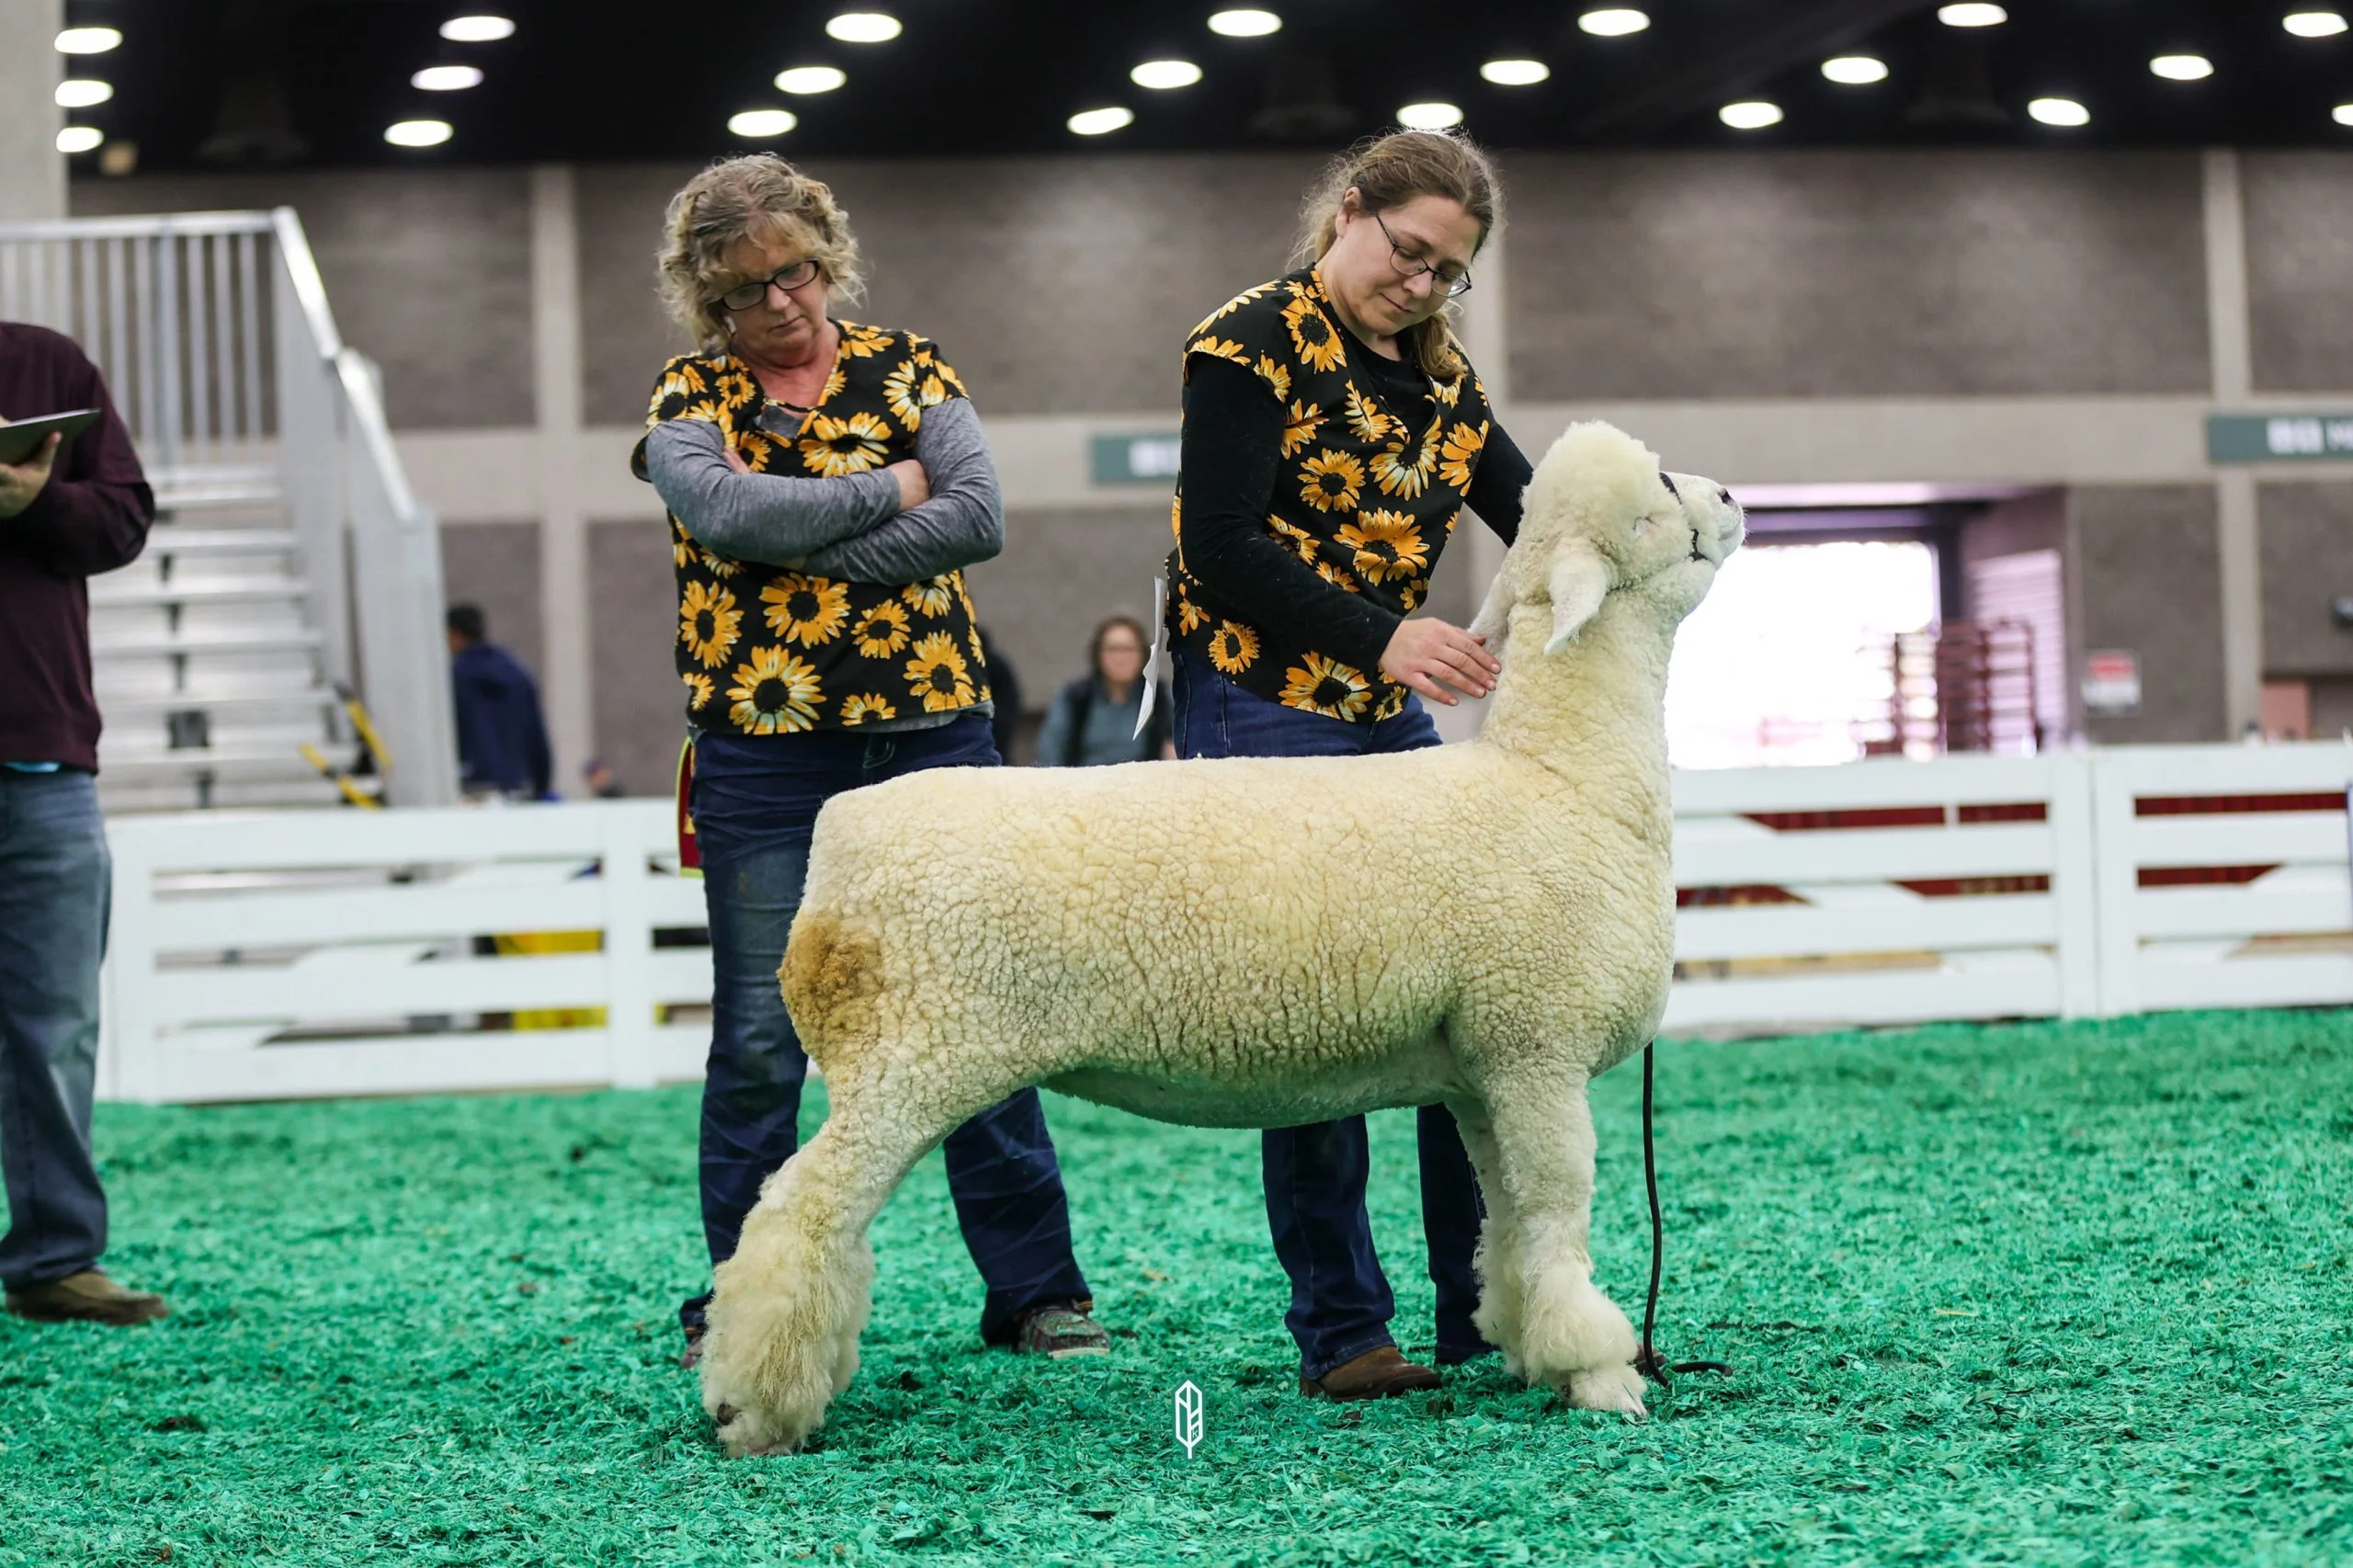 2023 National White Romney Show at NAILE
1st place spring ewe lamb exhibited by Emma Rogers of Woodland Acres